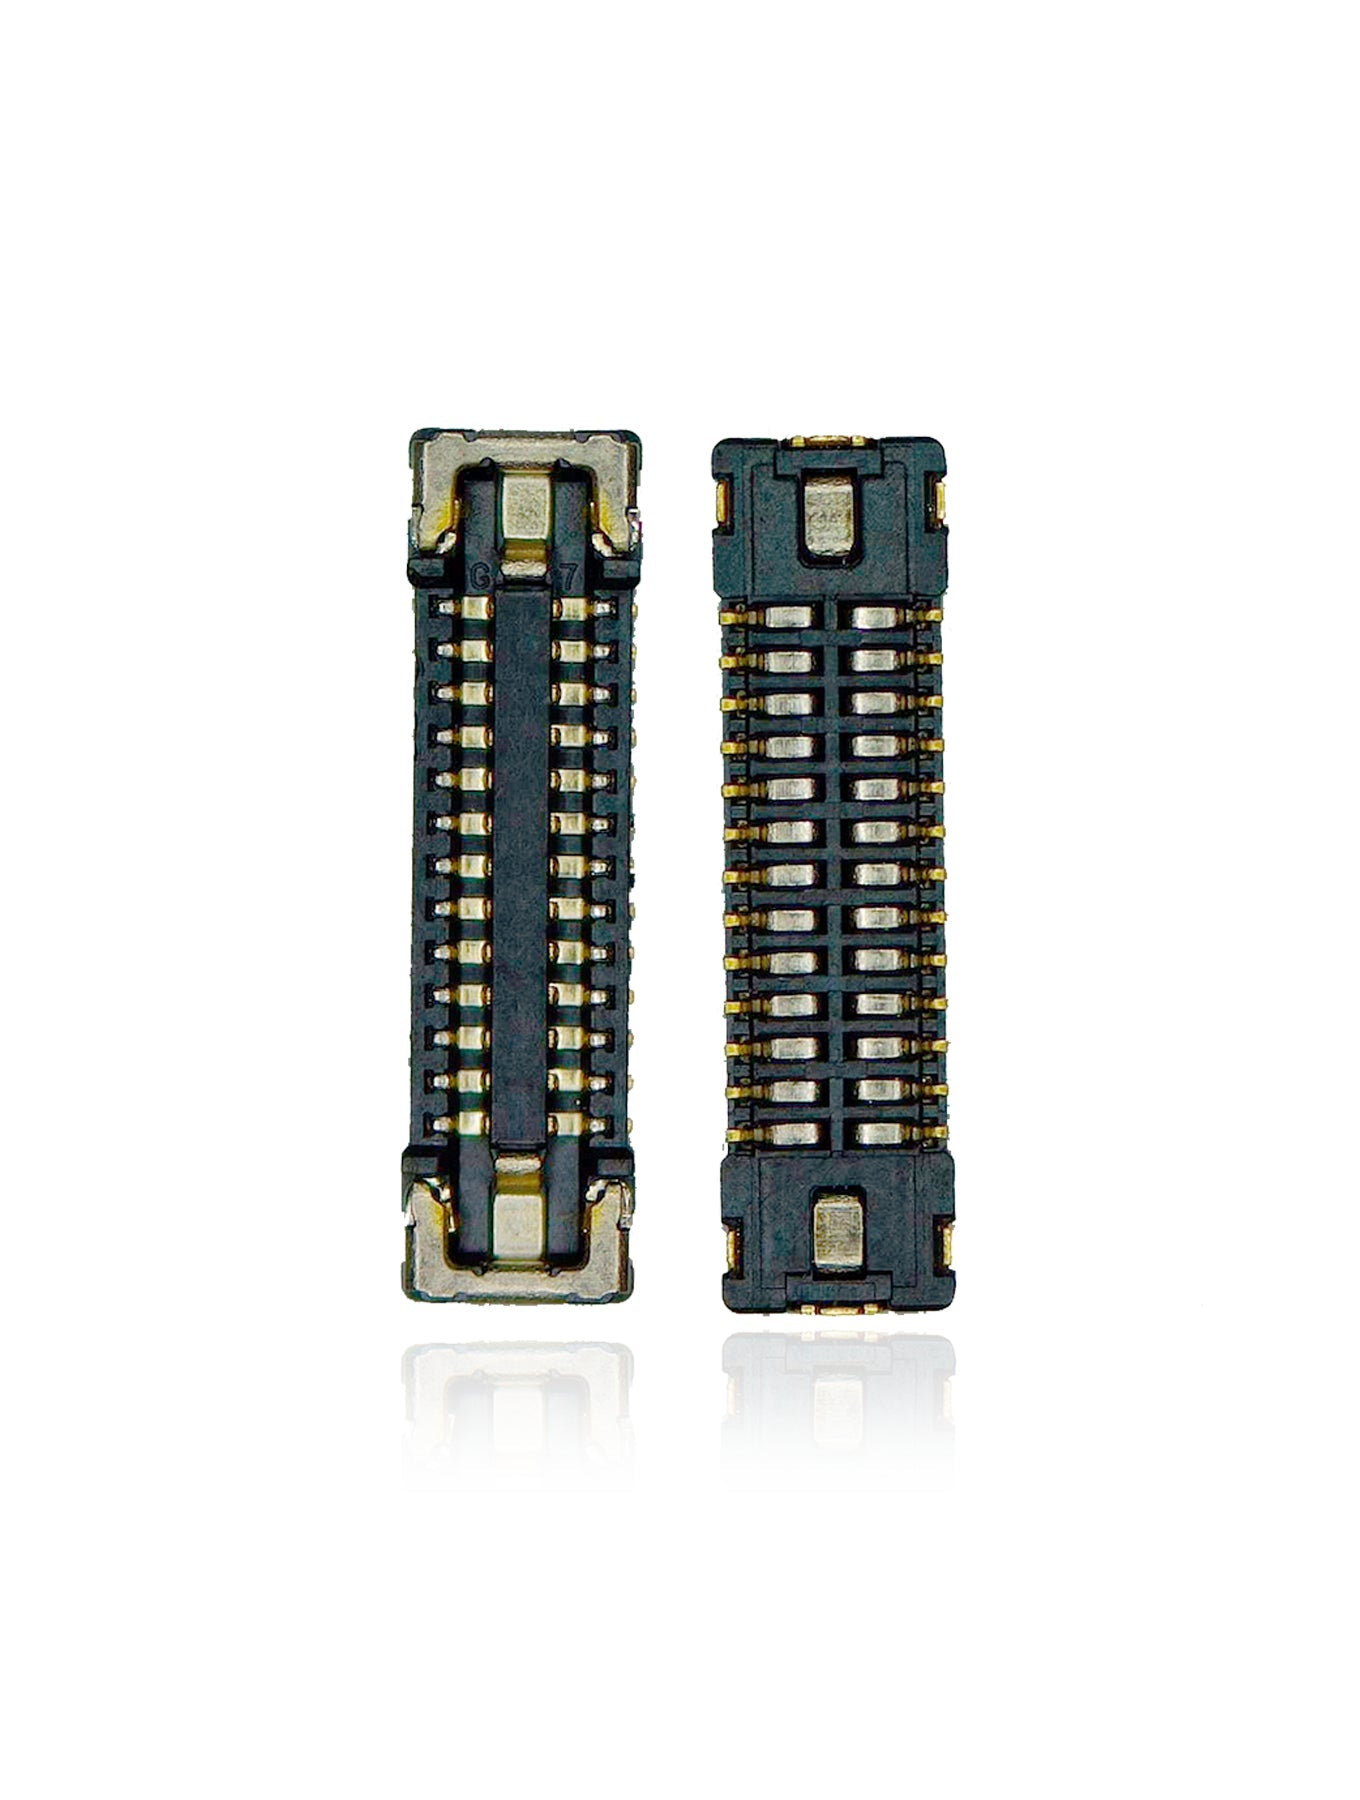 LCD FPC CONNECTOR COMPATIBLE WITH IPHONE 11 (J8000: 26 PIN)